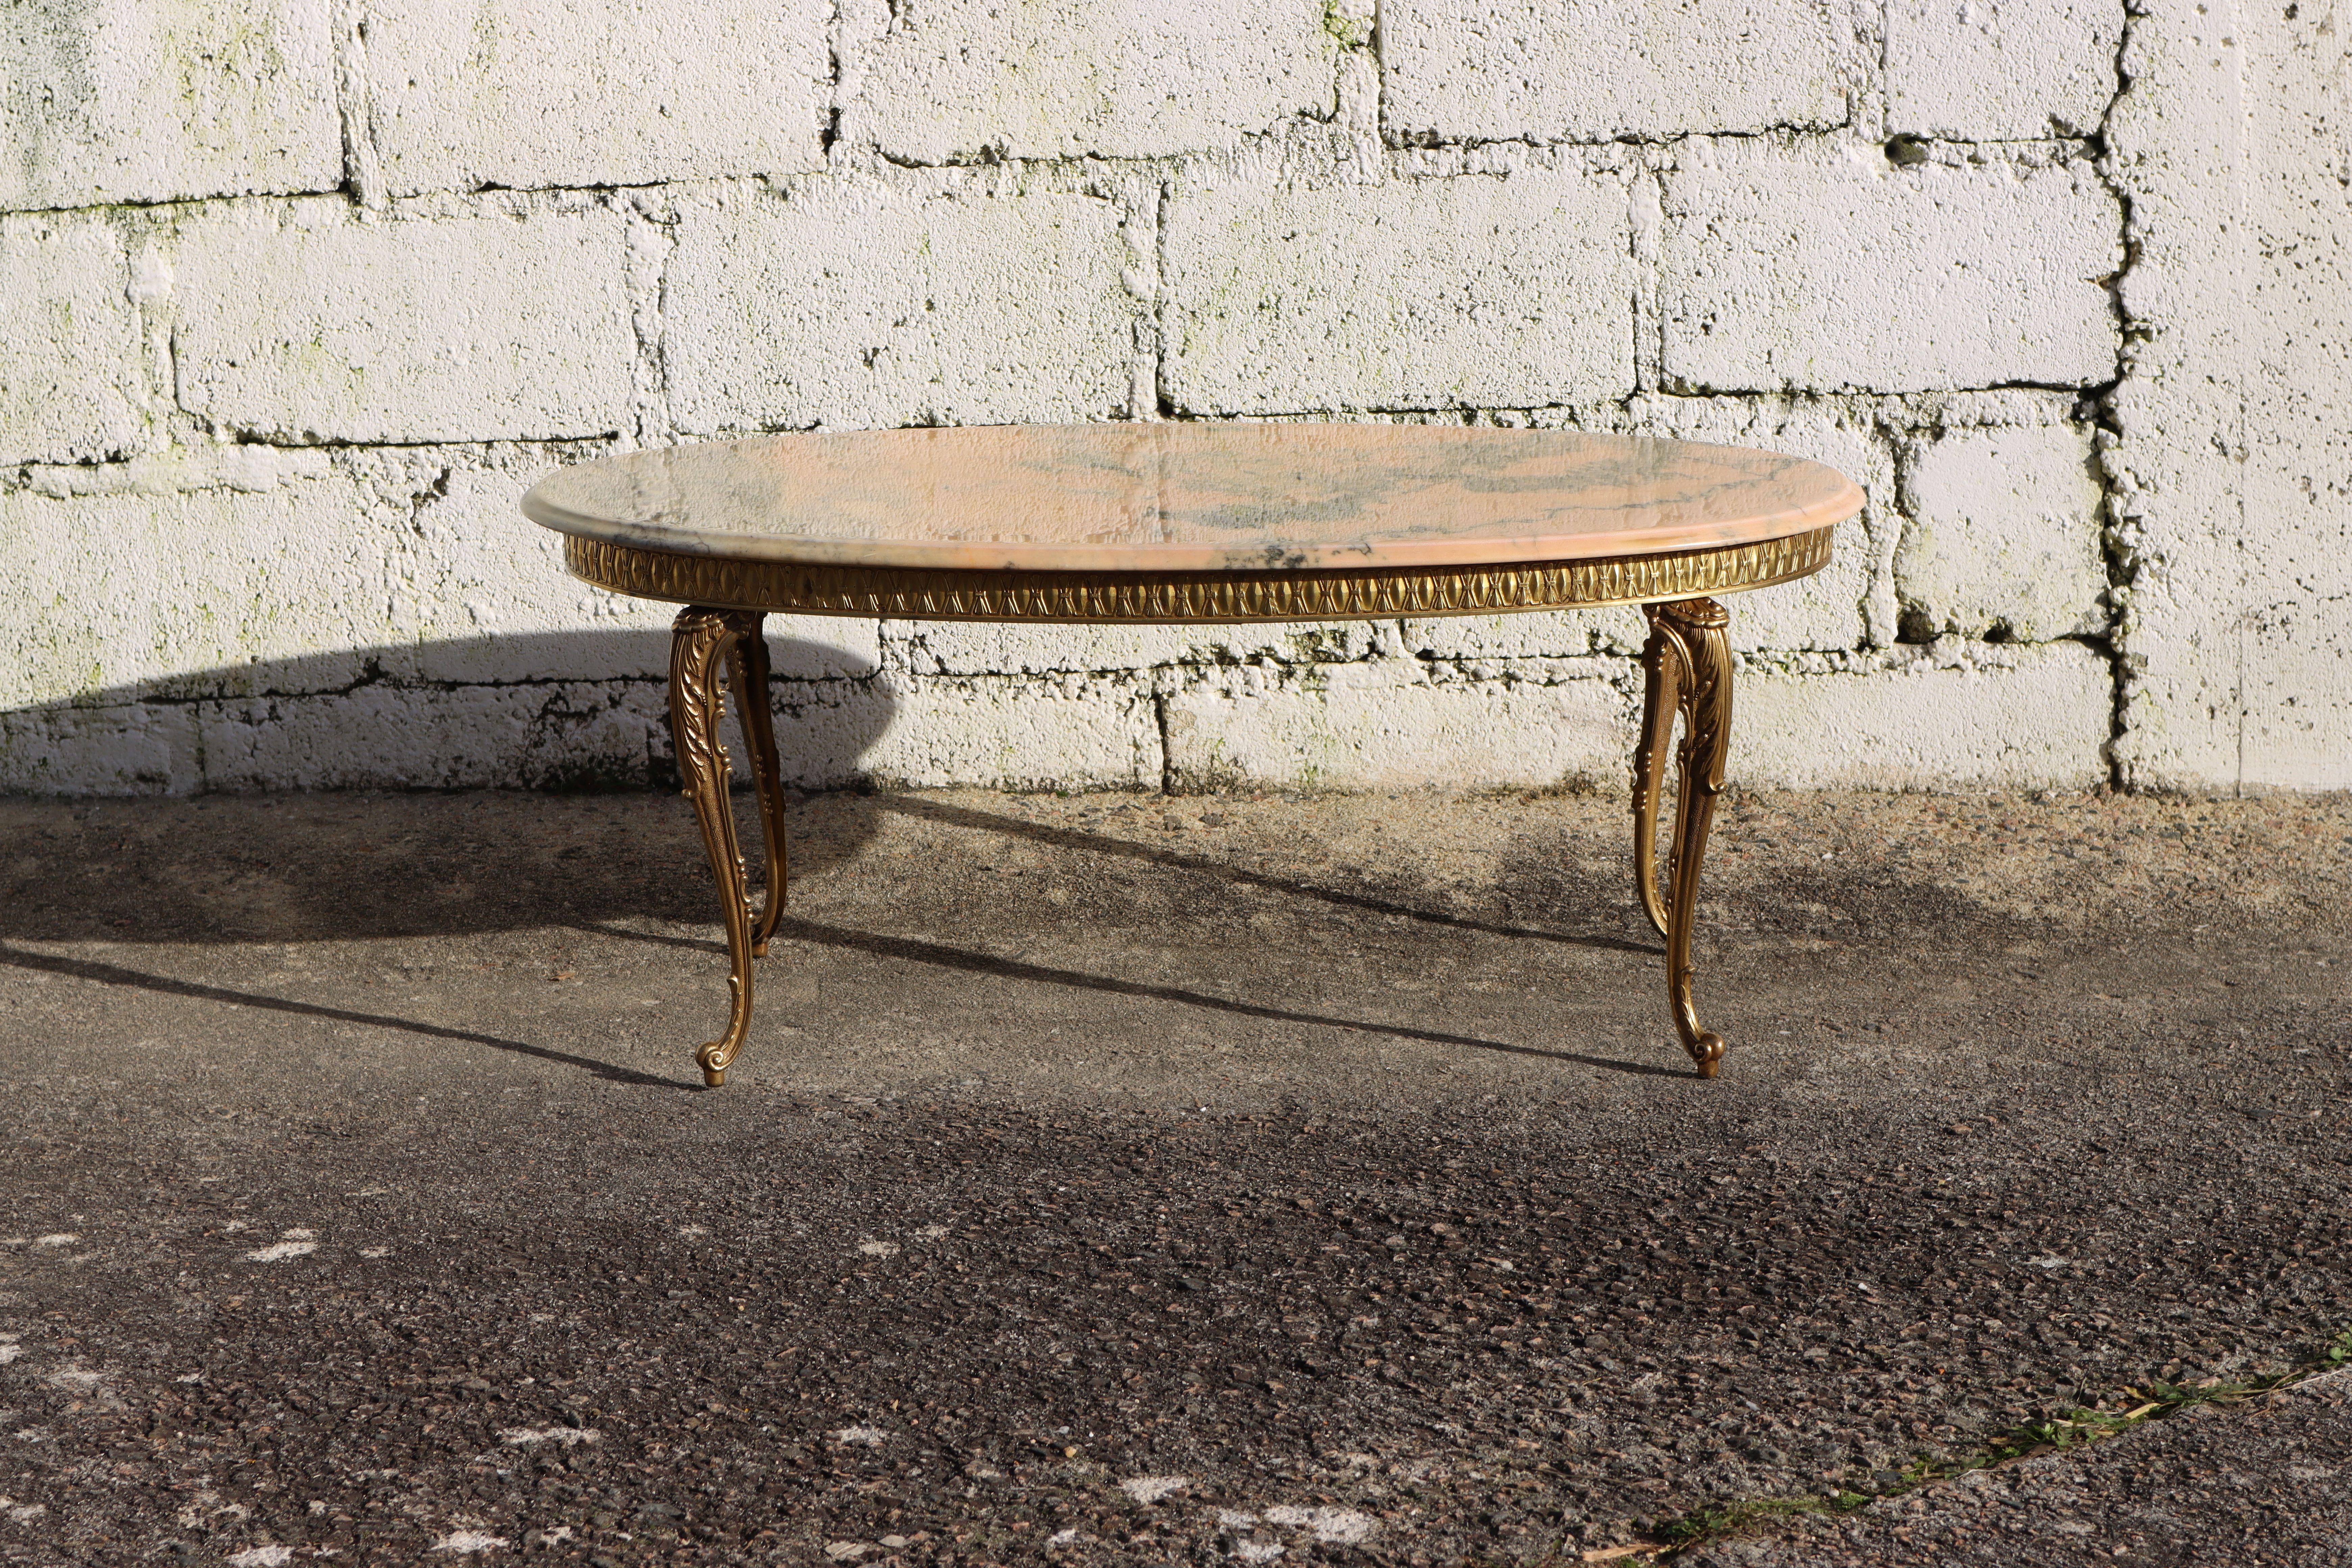 Wonderful French Vintage Marble and Brass Coffee Table - Lounge Table Style Louis XV from the 60s
Oval Marble Top all-round decorative Edge
Splendid Colors : vanilla, rose, gray, and anthracite- a real colorful spectacle
Stable and elegant richly